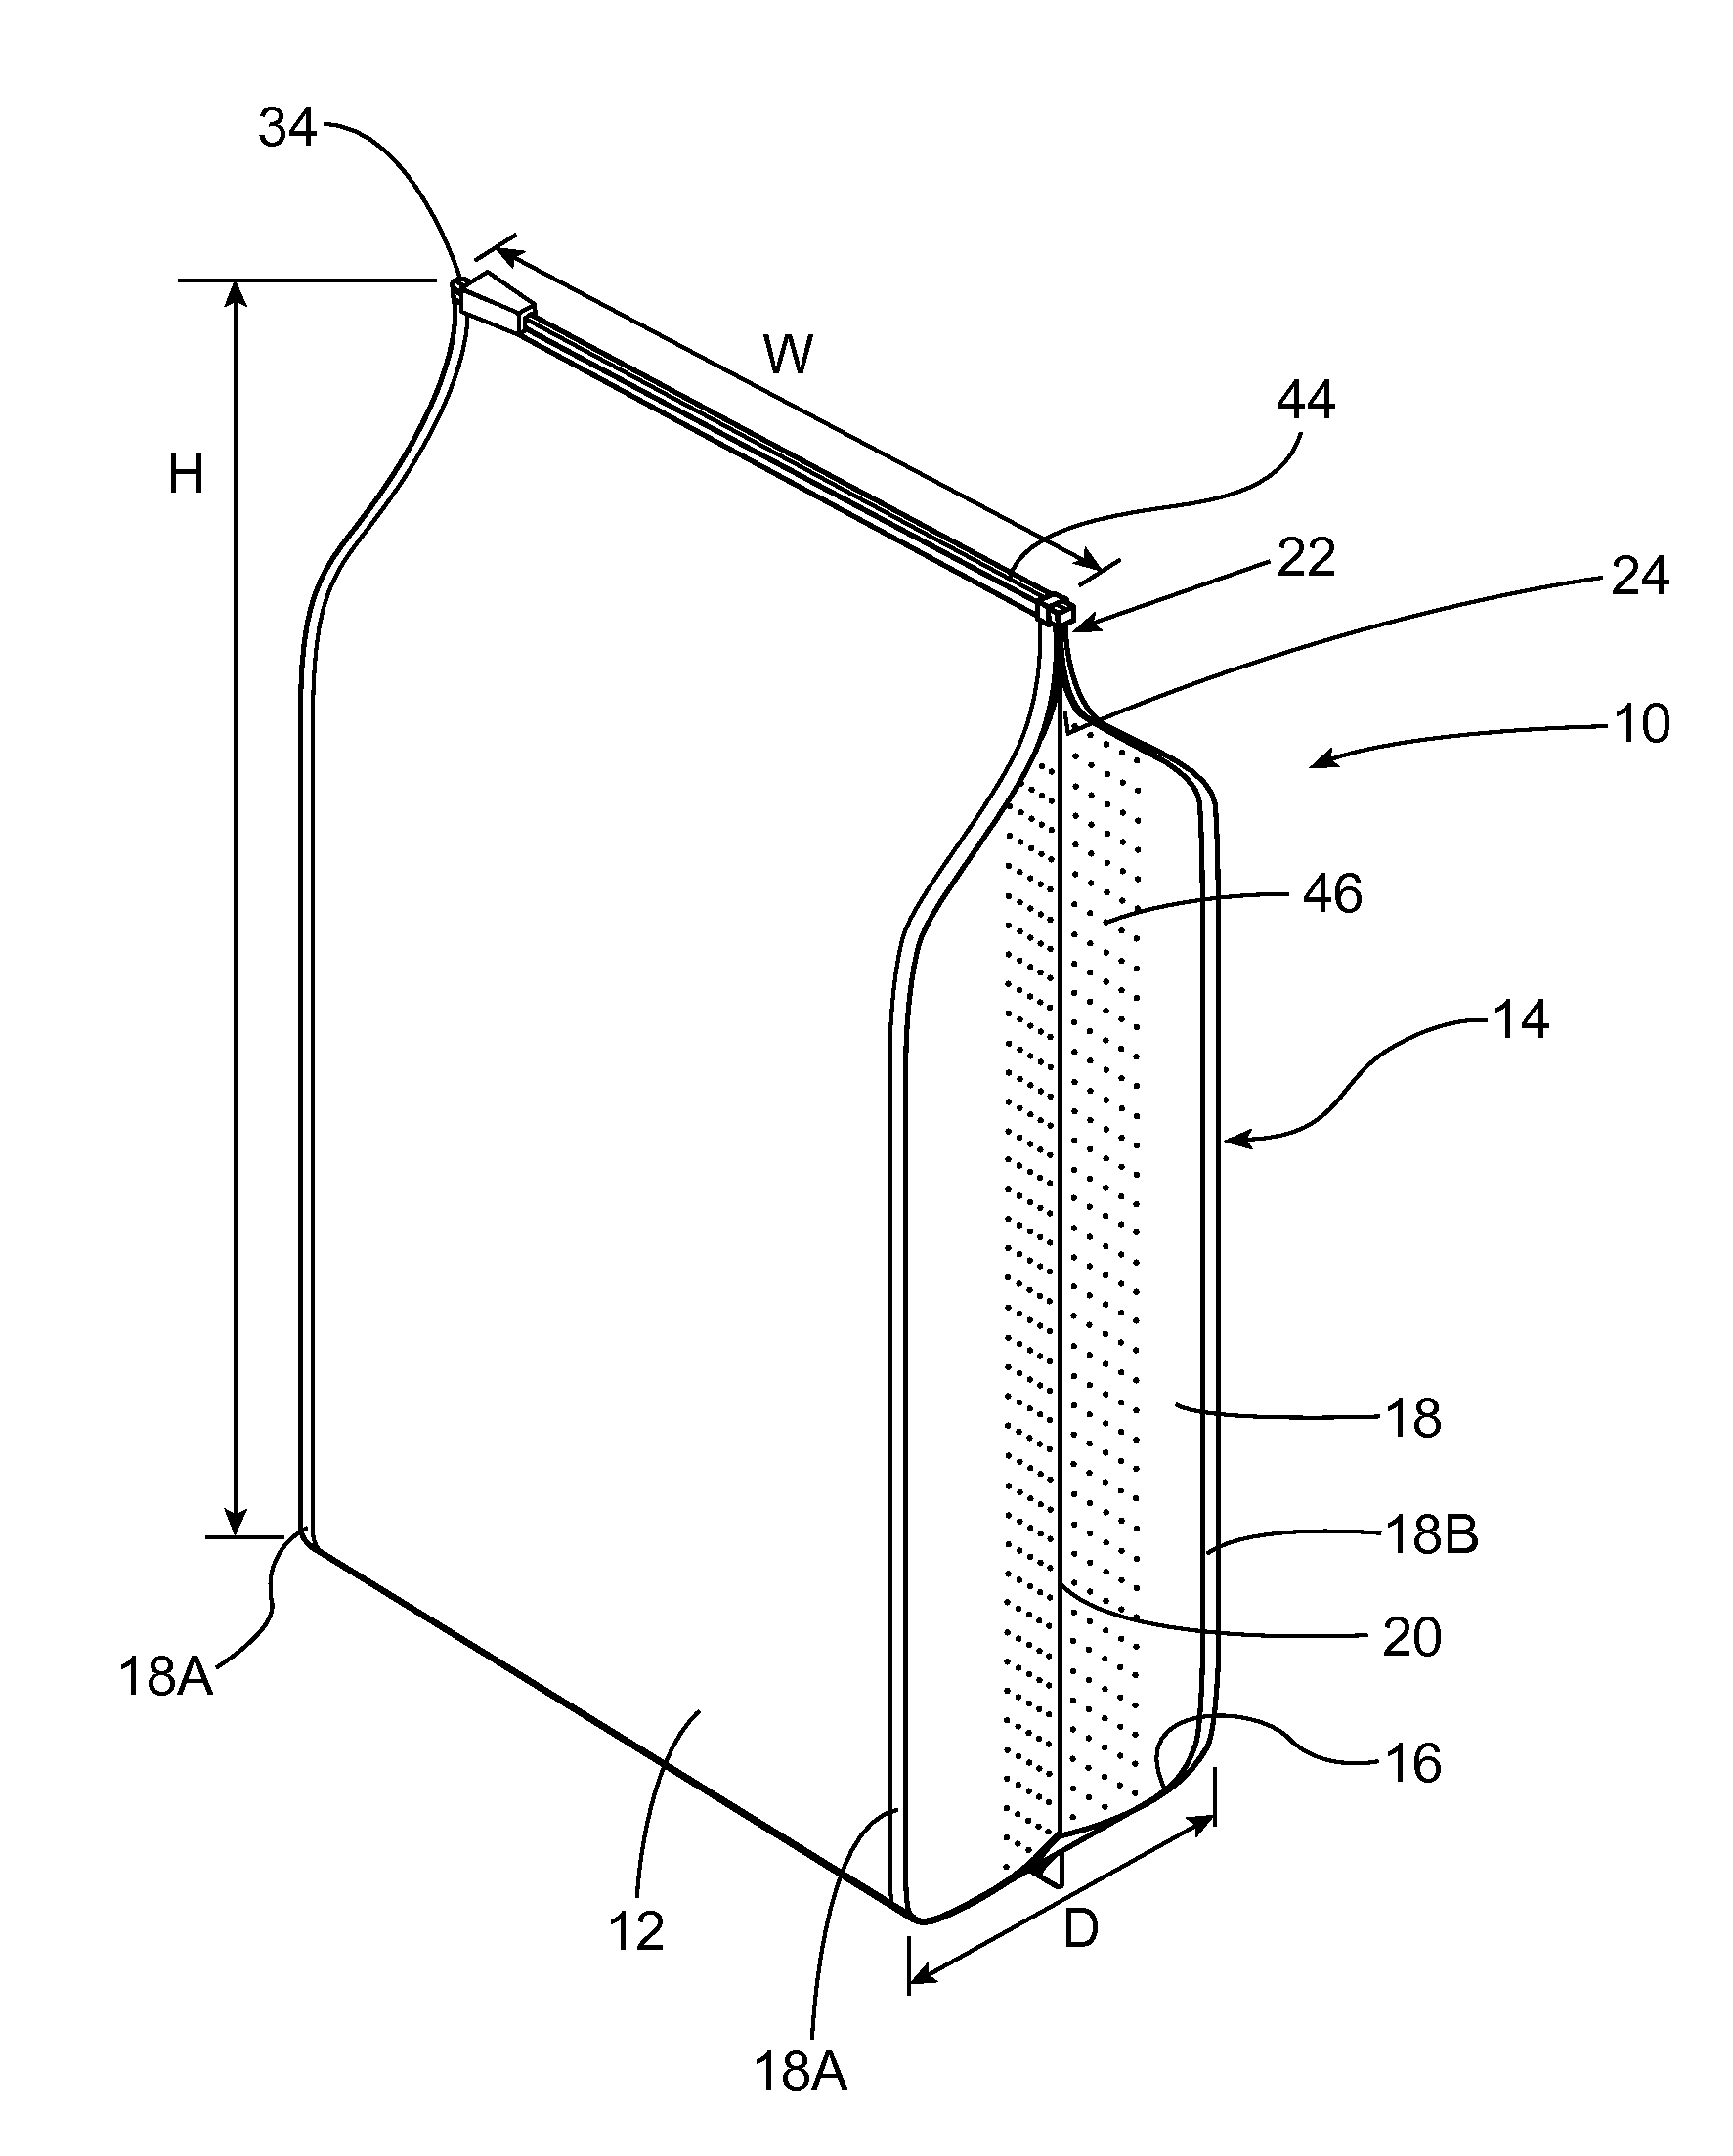 Bag and article of manufacture